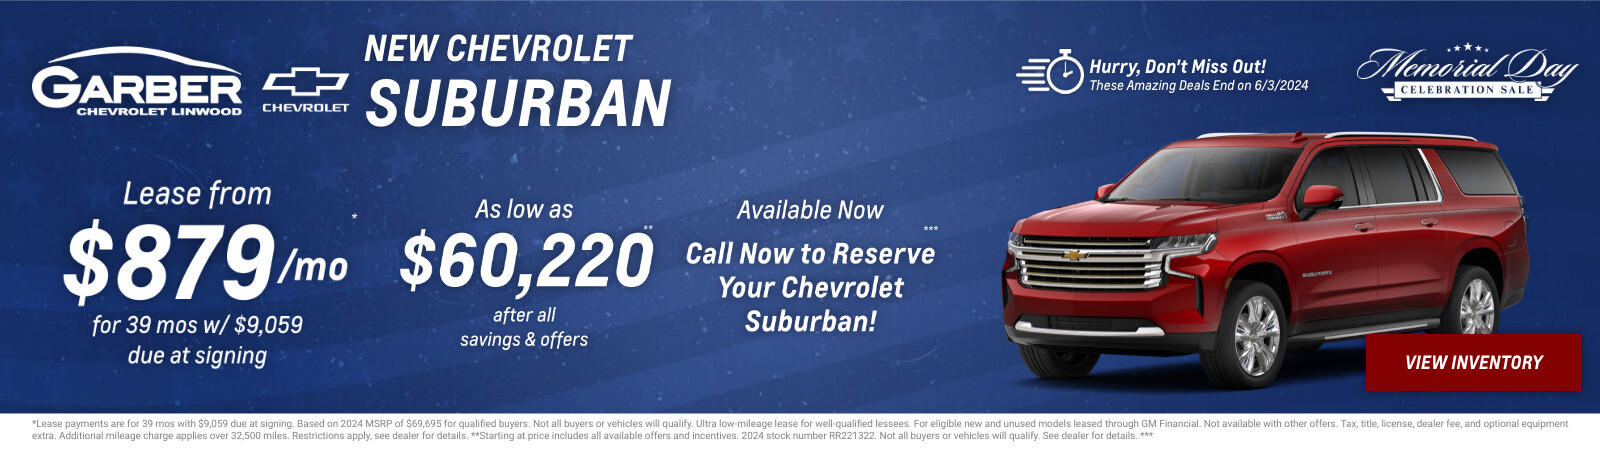 New Chevrolet Suburban Current Deals and Offers in Bay City, MI